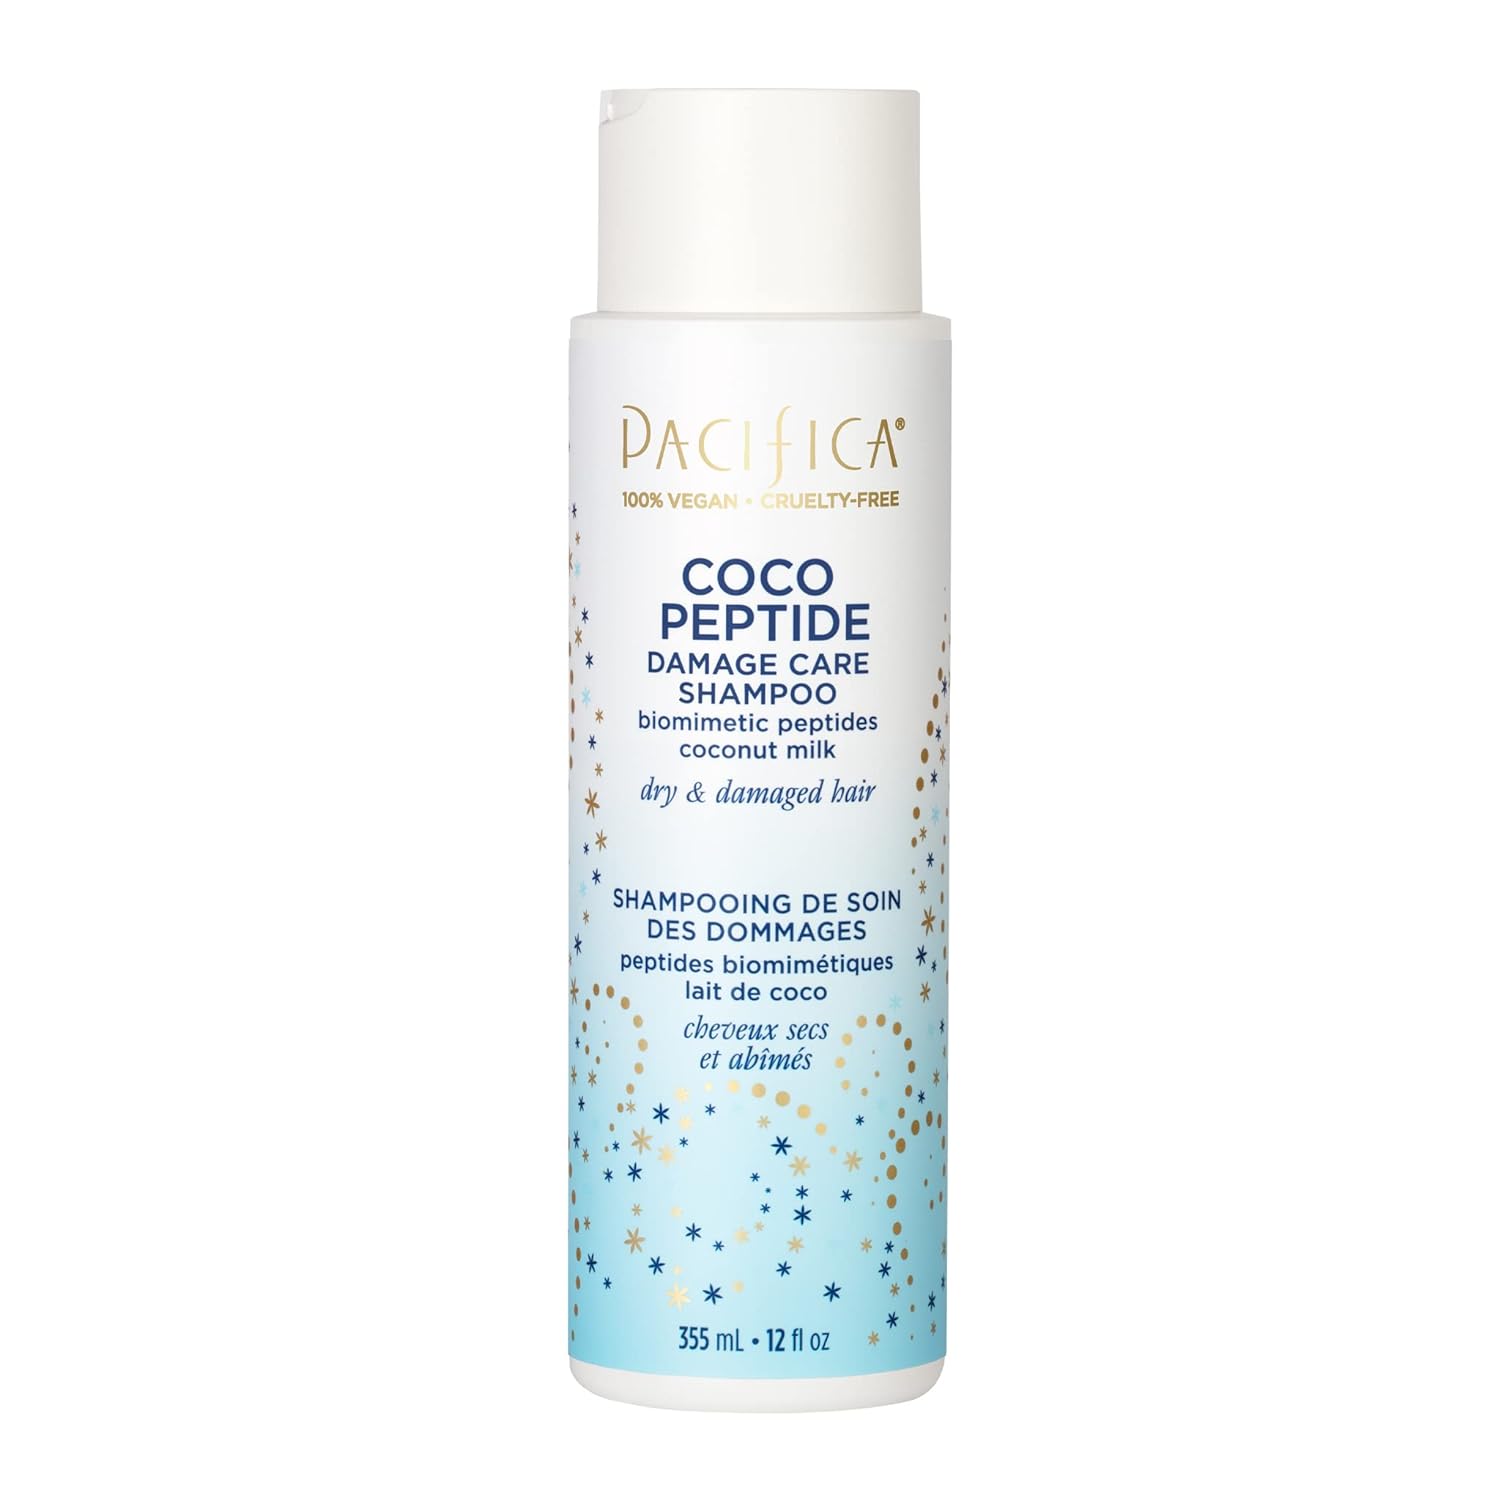 Pacifica Beauty, Coco Peptide Damage Care Shampoo, Dry & Damaged Hair, Repair Damage from Bleach, Color, Chemical Services, Chlorine, & Heat, Coconut, Vitamin B5, Peptide, Treat Split Ends & Breakage